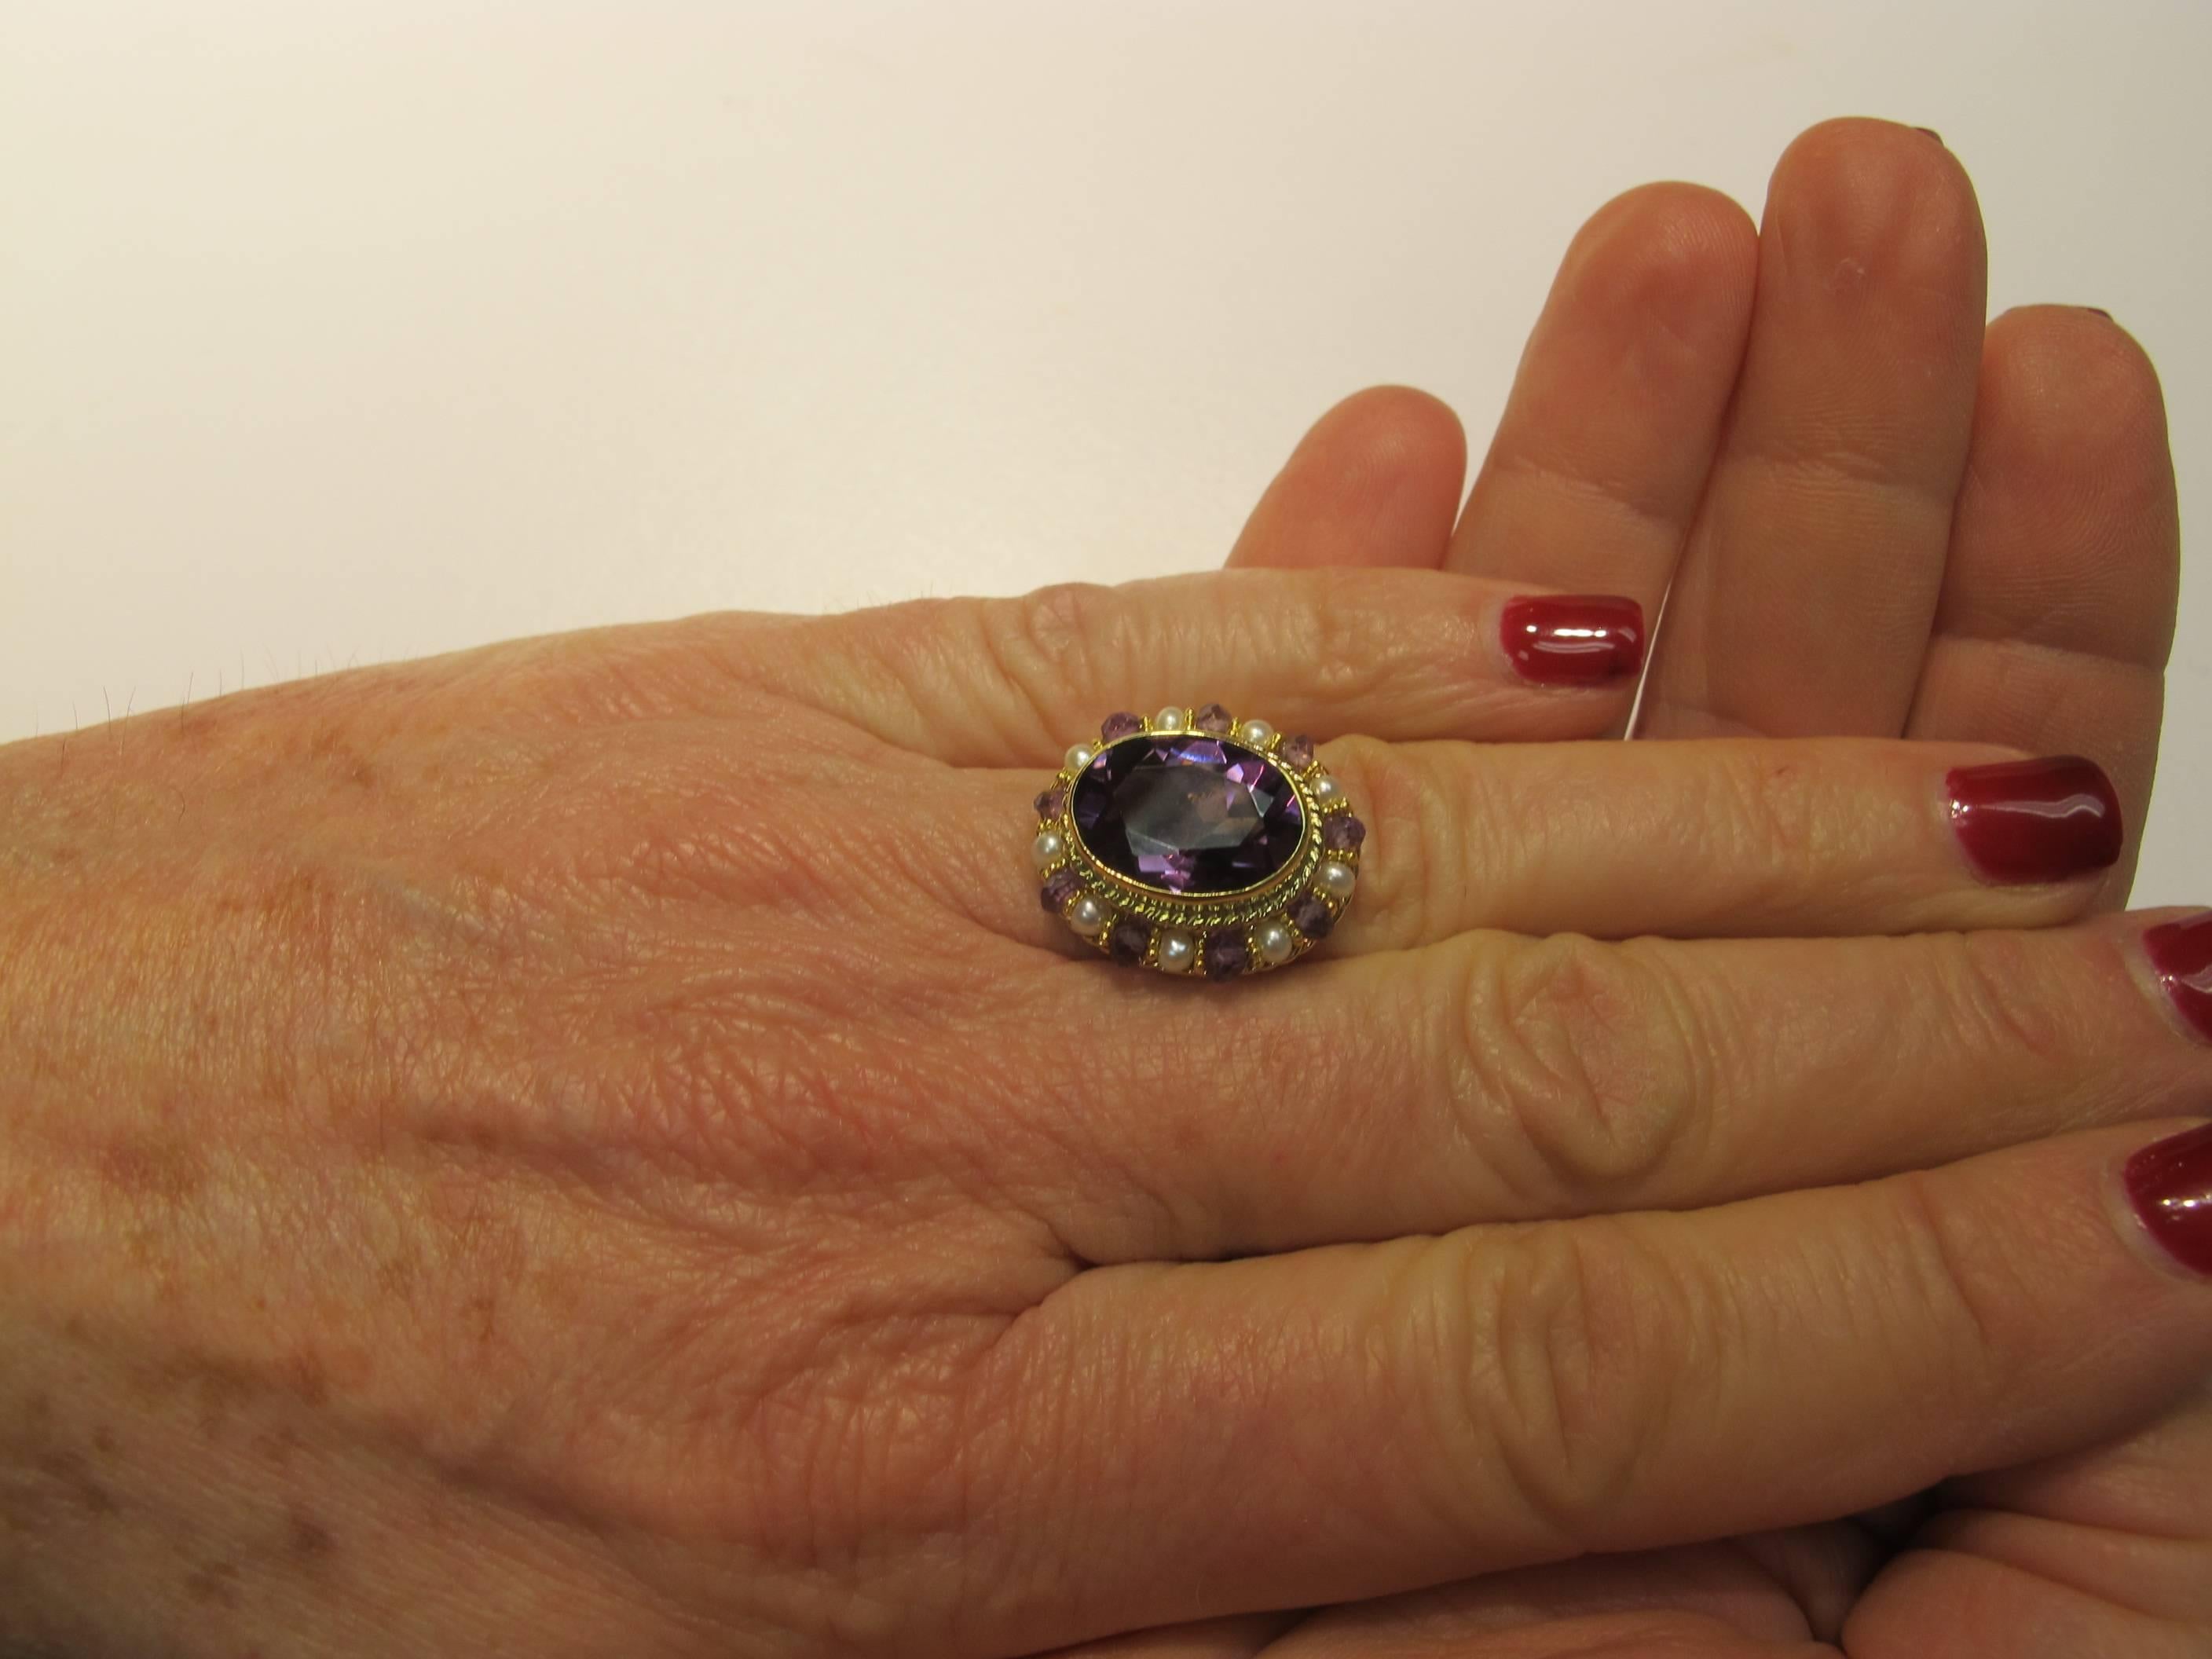 This ring features a lavender color, oval, facetted Amethyst (14.50x10.50, 9.90 carats) encircled by 2mm Seed Pearls and Amethyst beads strung on gold wire. This style of craftsmanship is seldom seen. 100% handmade filigree made from 18k gold wire.